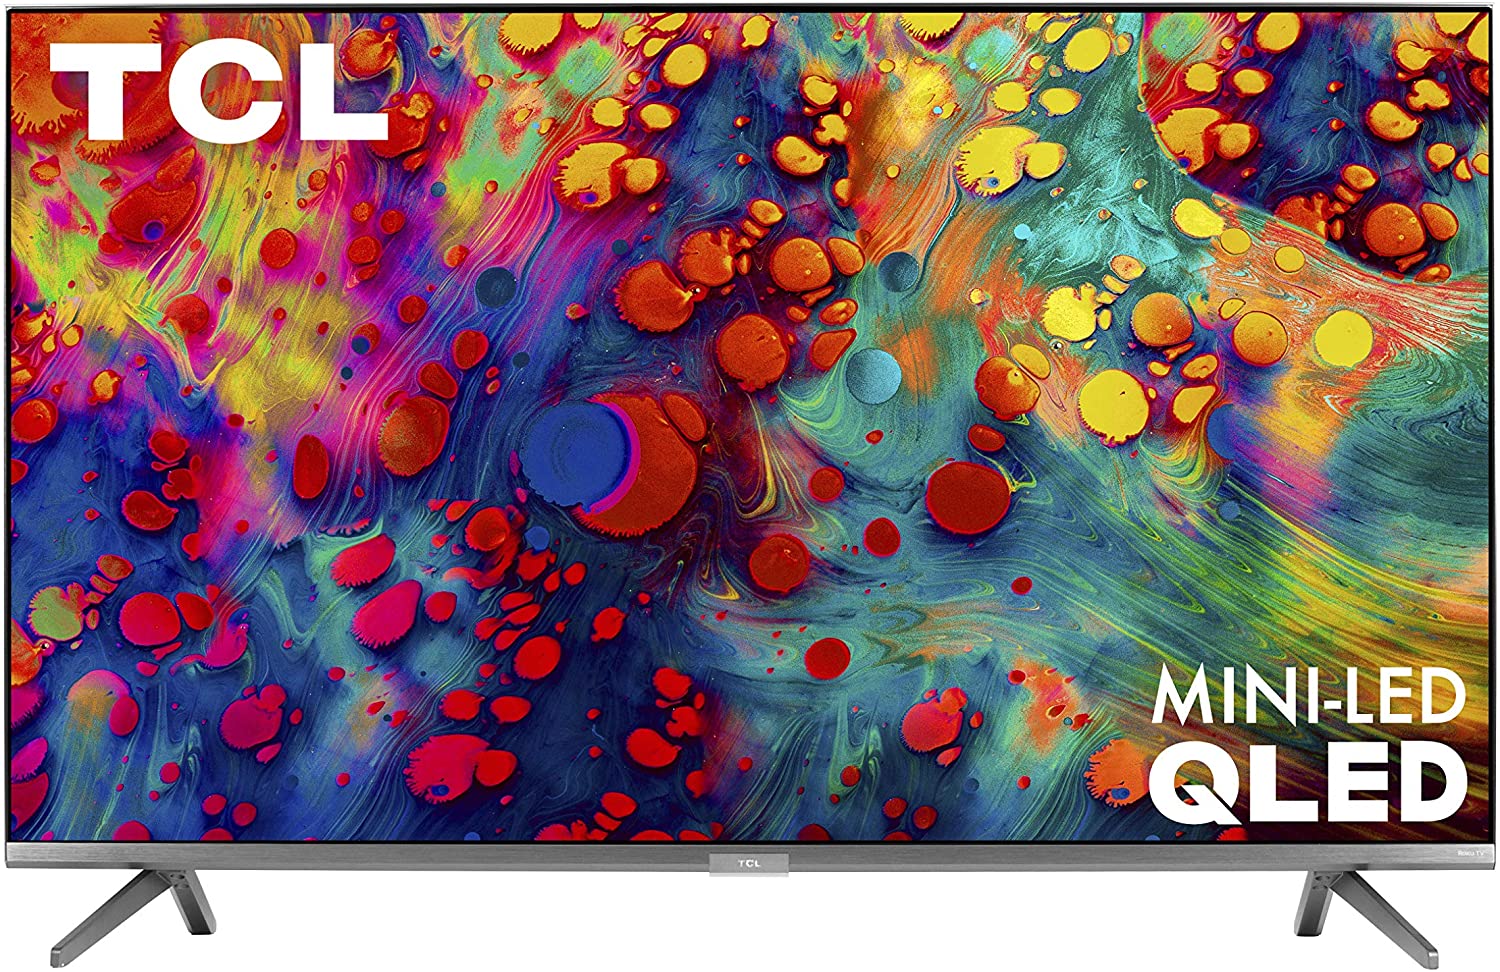 Amazon.com has TCL 65R635 6-Series 4K UHD Mini-LED QLED Dolby Vision HDR Roku Smart HDTV on sale for $799. Shipping is free